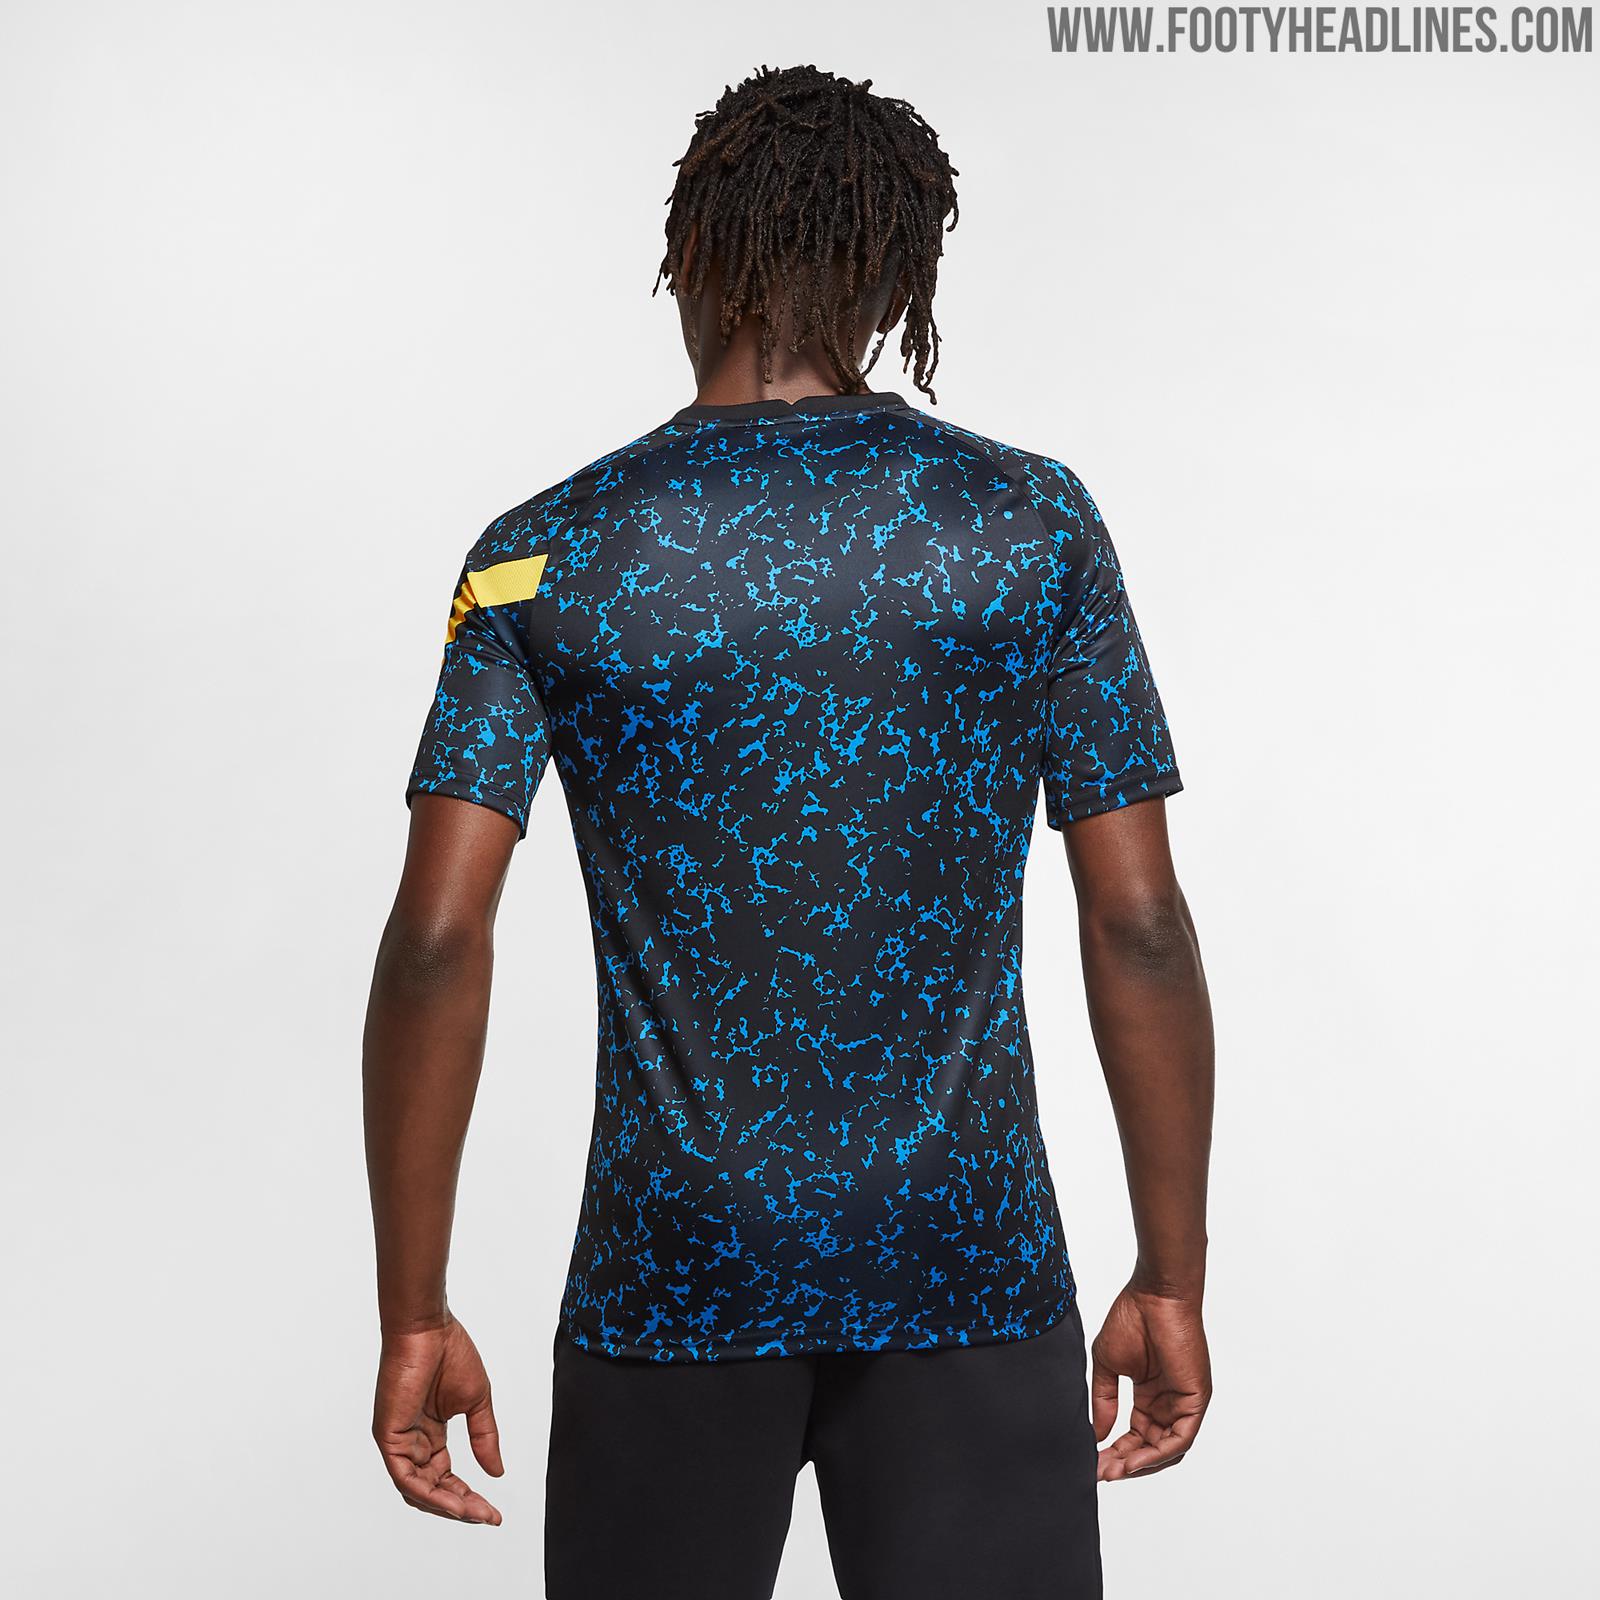 Outstanding Nike Inter 20-21 Collection Revealed - Footy Headlines